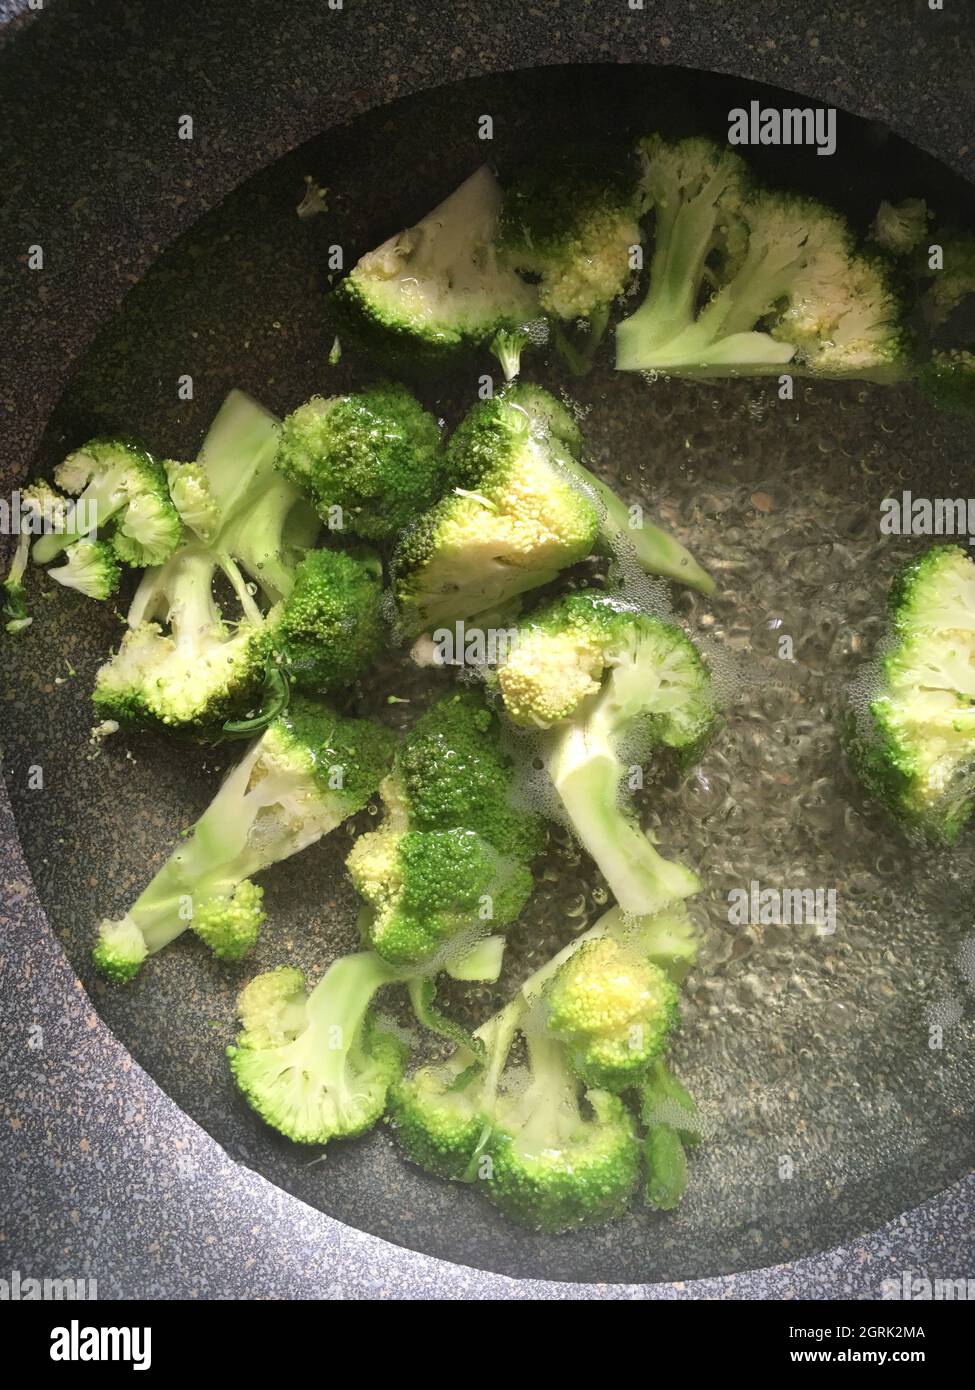 High Angle View Of Chopped Broccoli Vegetables In Pan Stock Photo